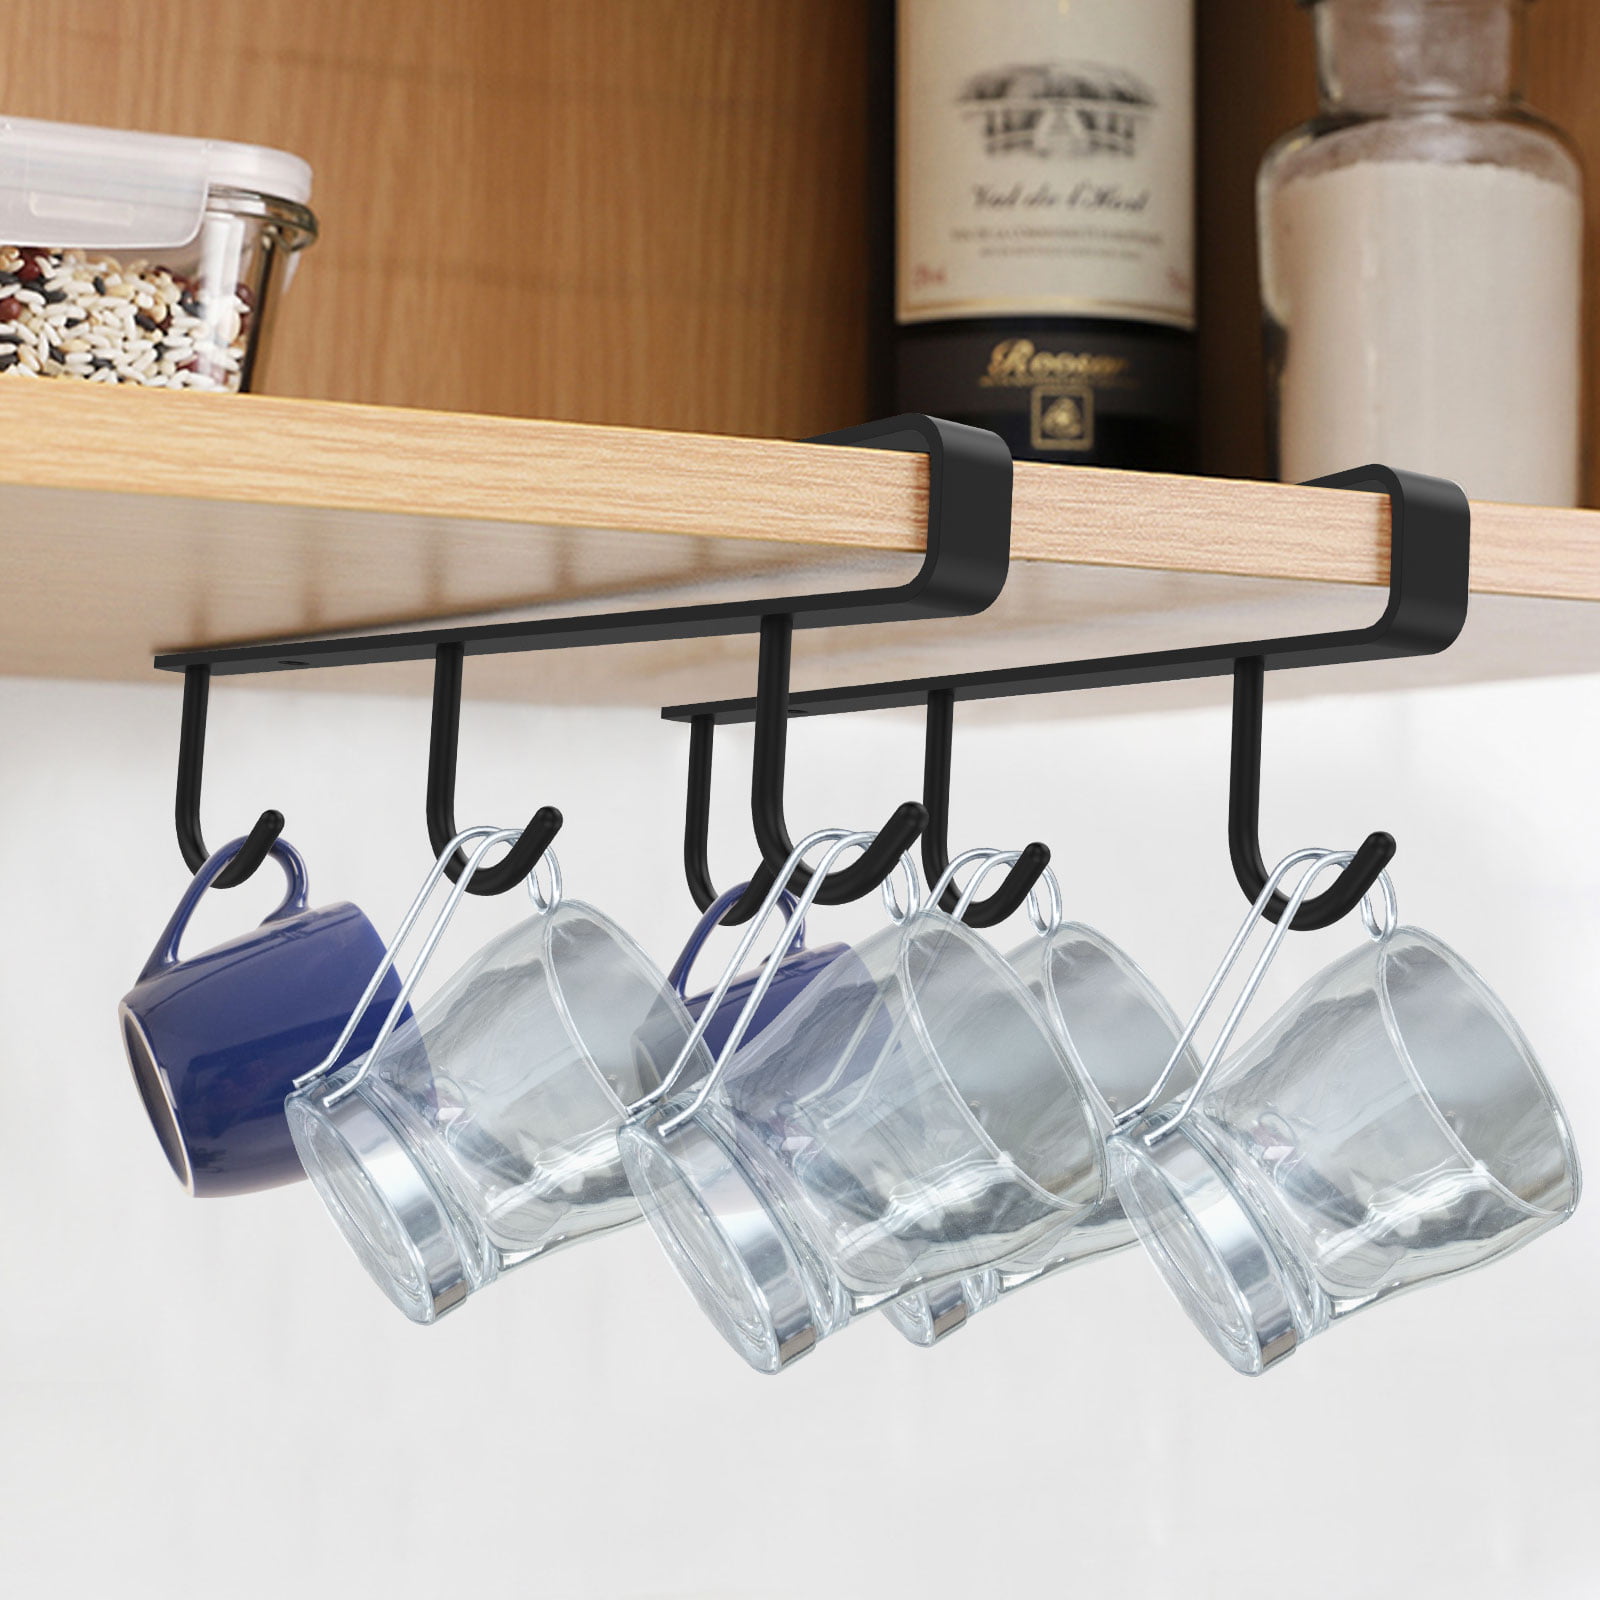 Mug/cup Hanger Kitchen Mug Holders Kitchen Decor Pottery Under Cabinet  Mount for Organizing Your Cups and Steins 